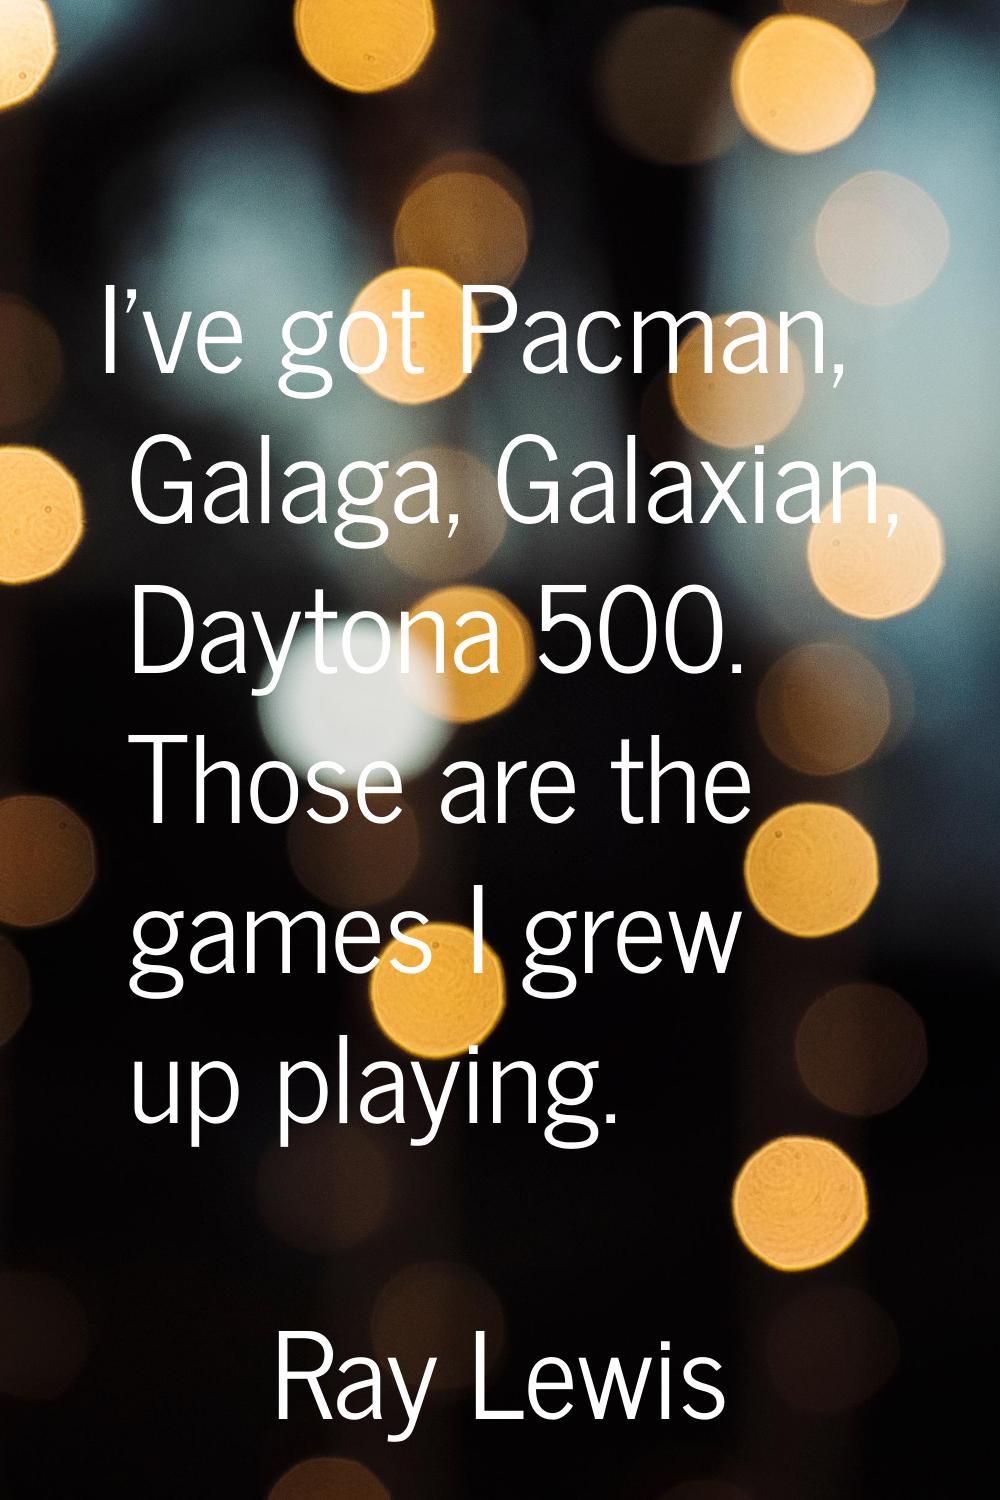 I've got Pacman, Galaga, Galaxian, Daytona 500. Those are the games I grew up playing.